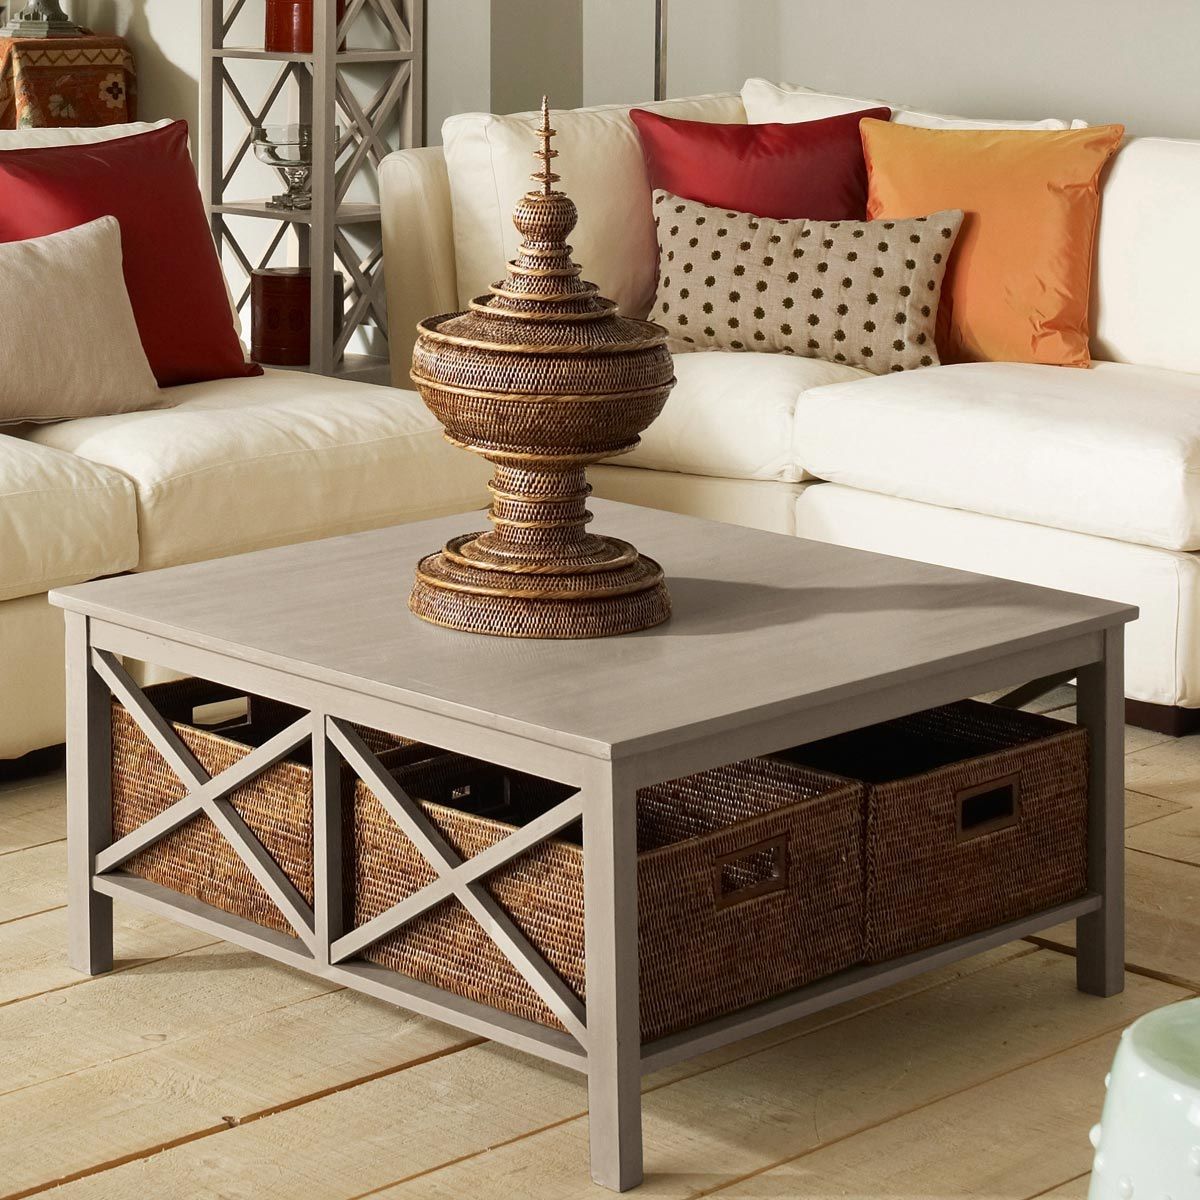 Captivating Coffee Table Storage